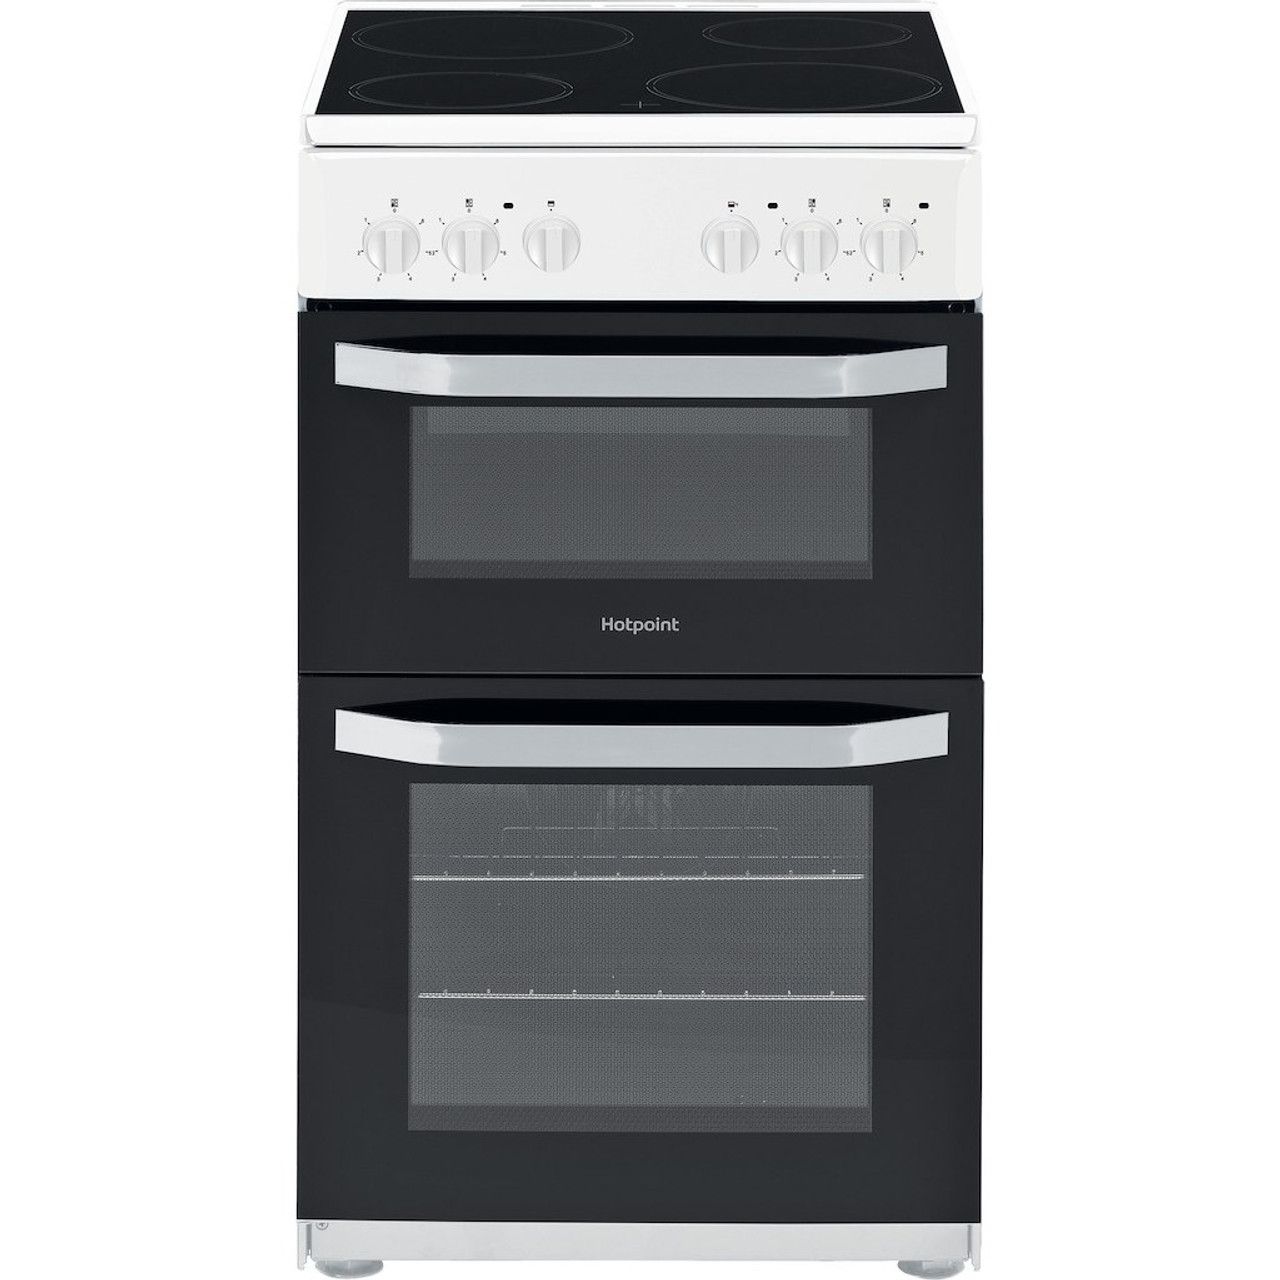 Hotpoint HD5V92KCWUK Double Cavity Freestanding Electric Cooker with Ceramic Hob